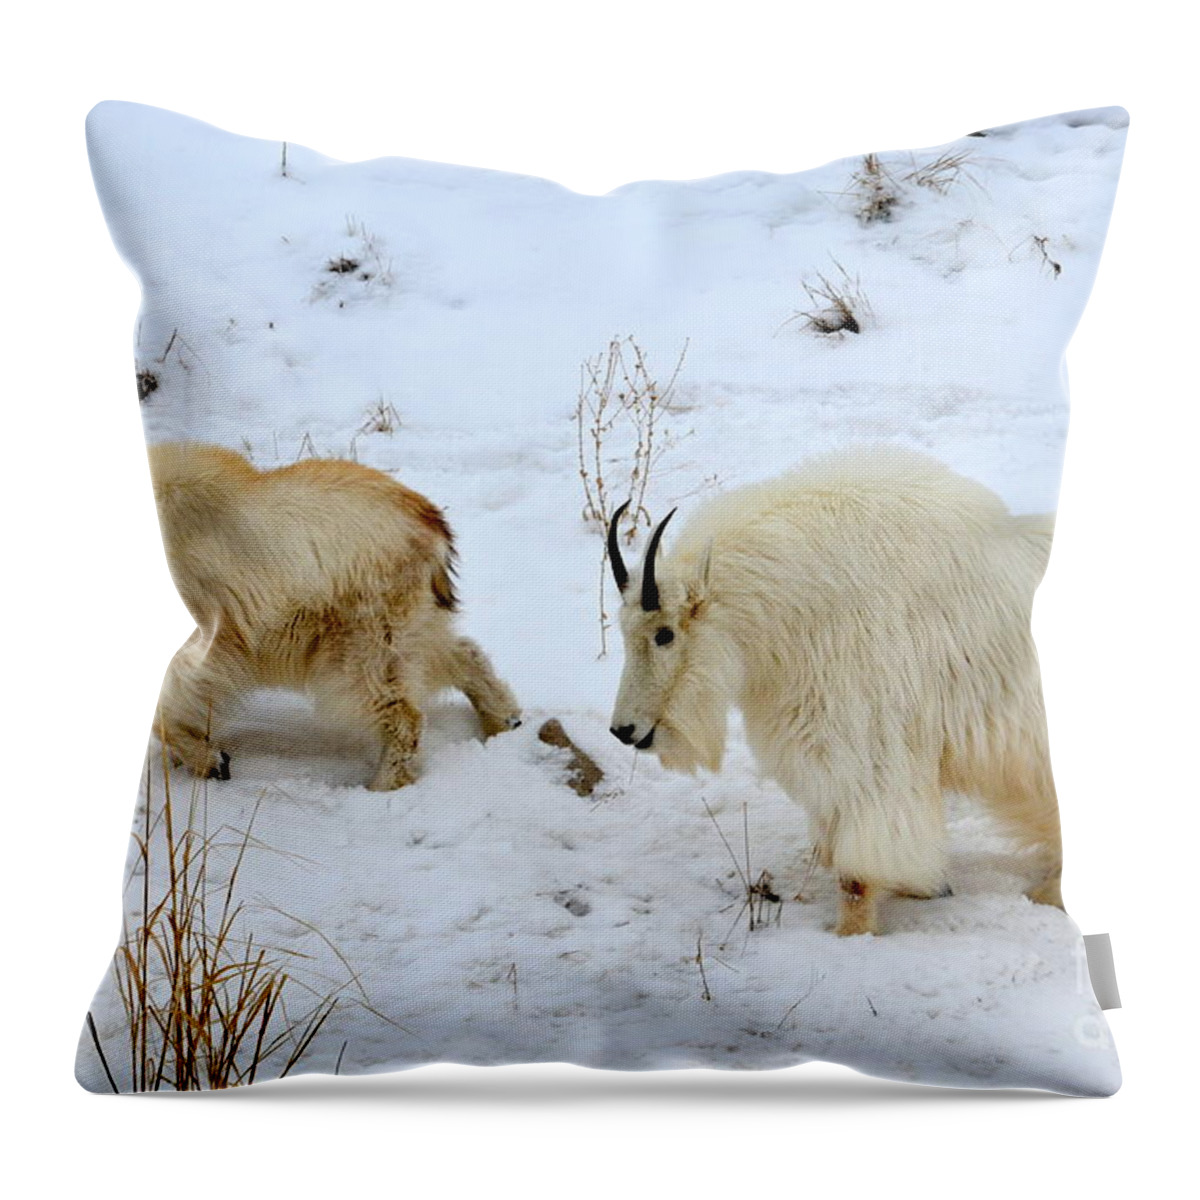 Mountain Goats Throw Pillow featuring the photograph Mother and Child by Dorrene BrownButterfield